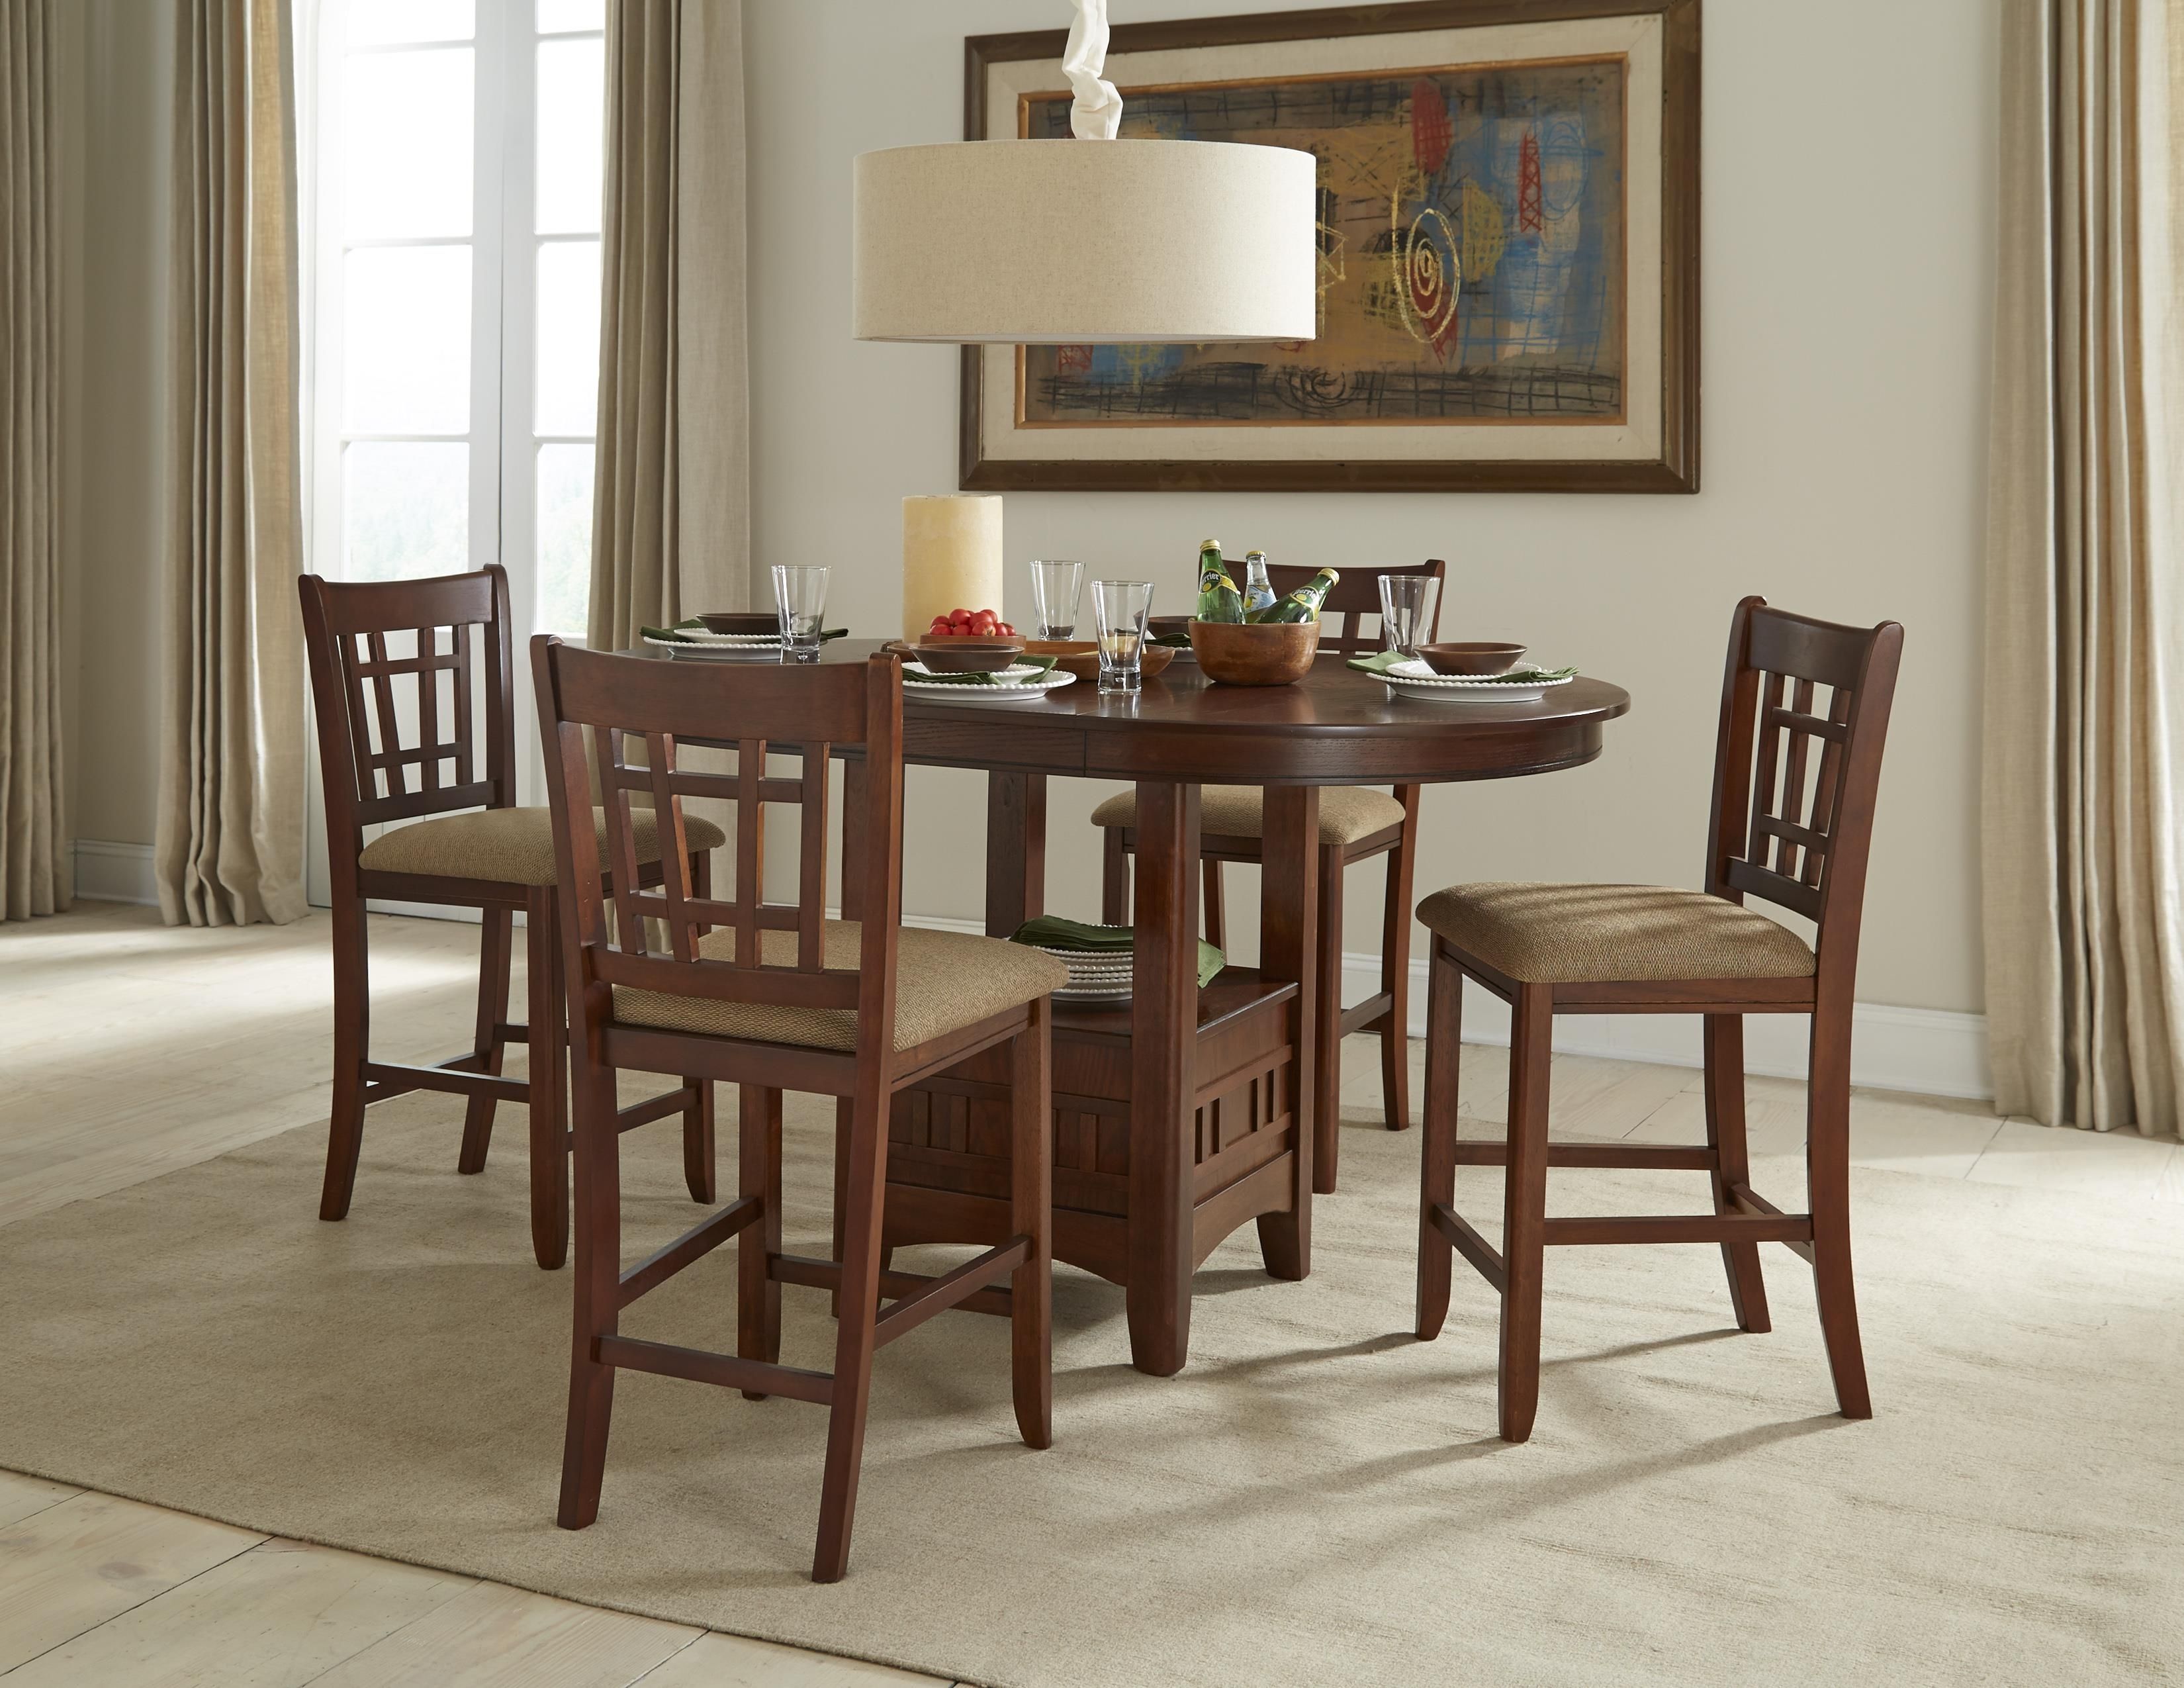 Intercon Mission Casuals 5 Piece Gathering Set | Wayside Furniture In Most Current Market 5 Piece Counter Sets (View 3 of 20)